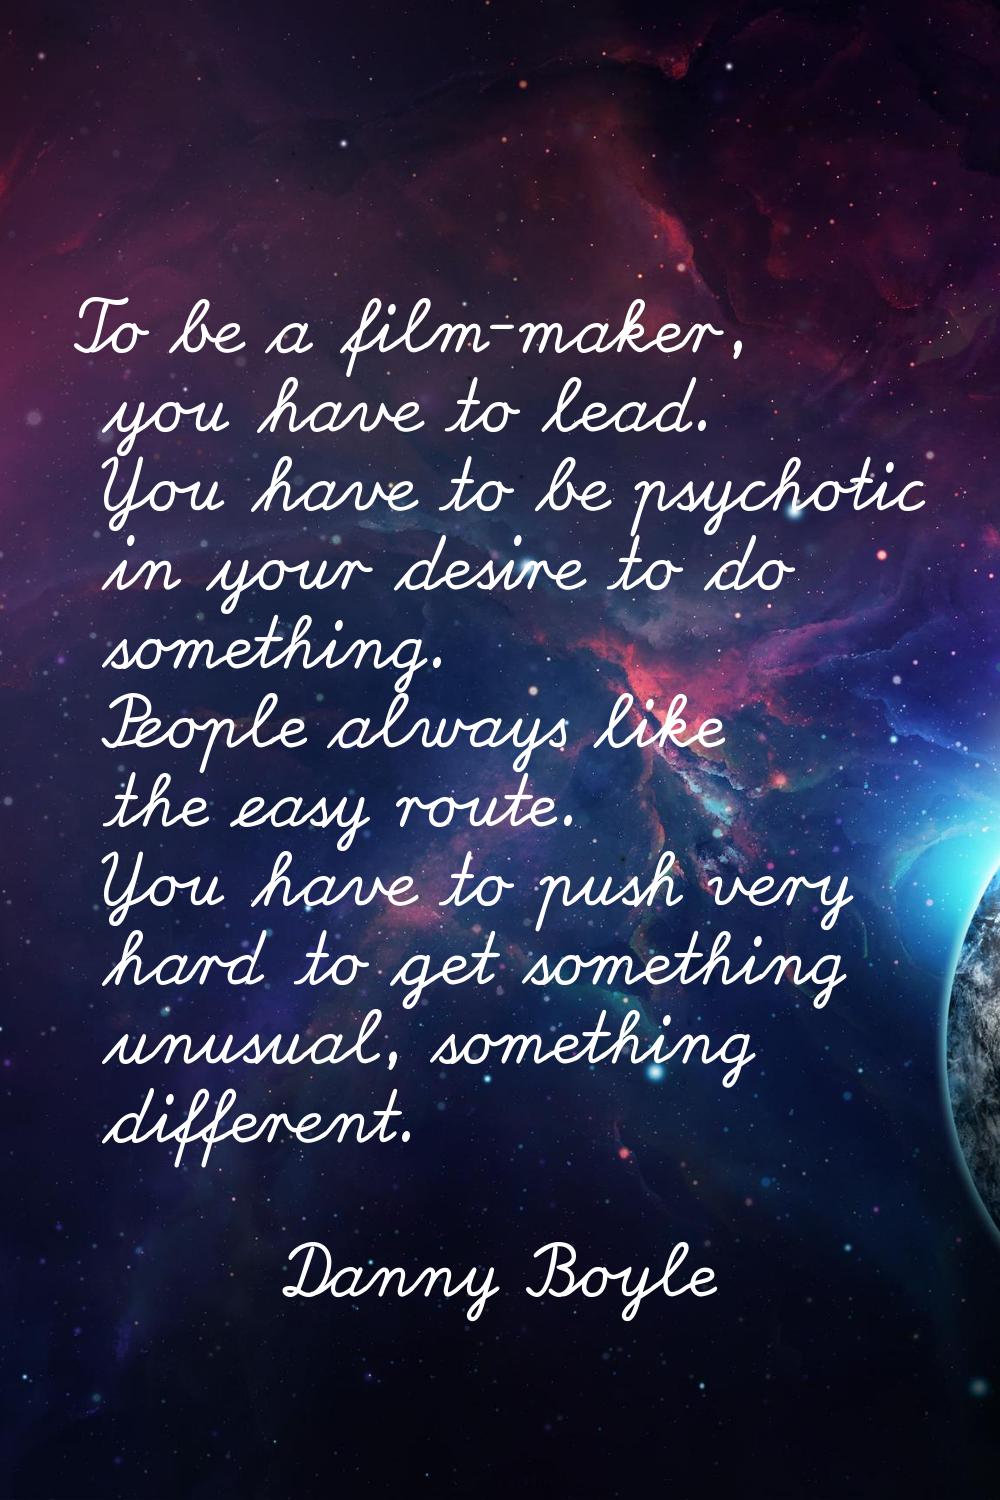 To be a film-maker, you have to lead. You have to be psychotic in your desire to do something. Peop